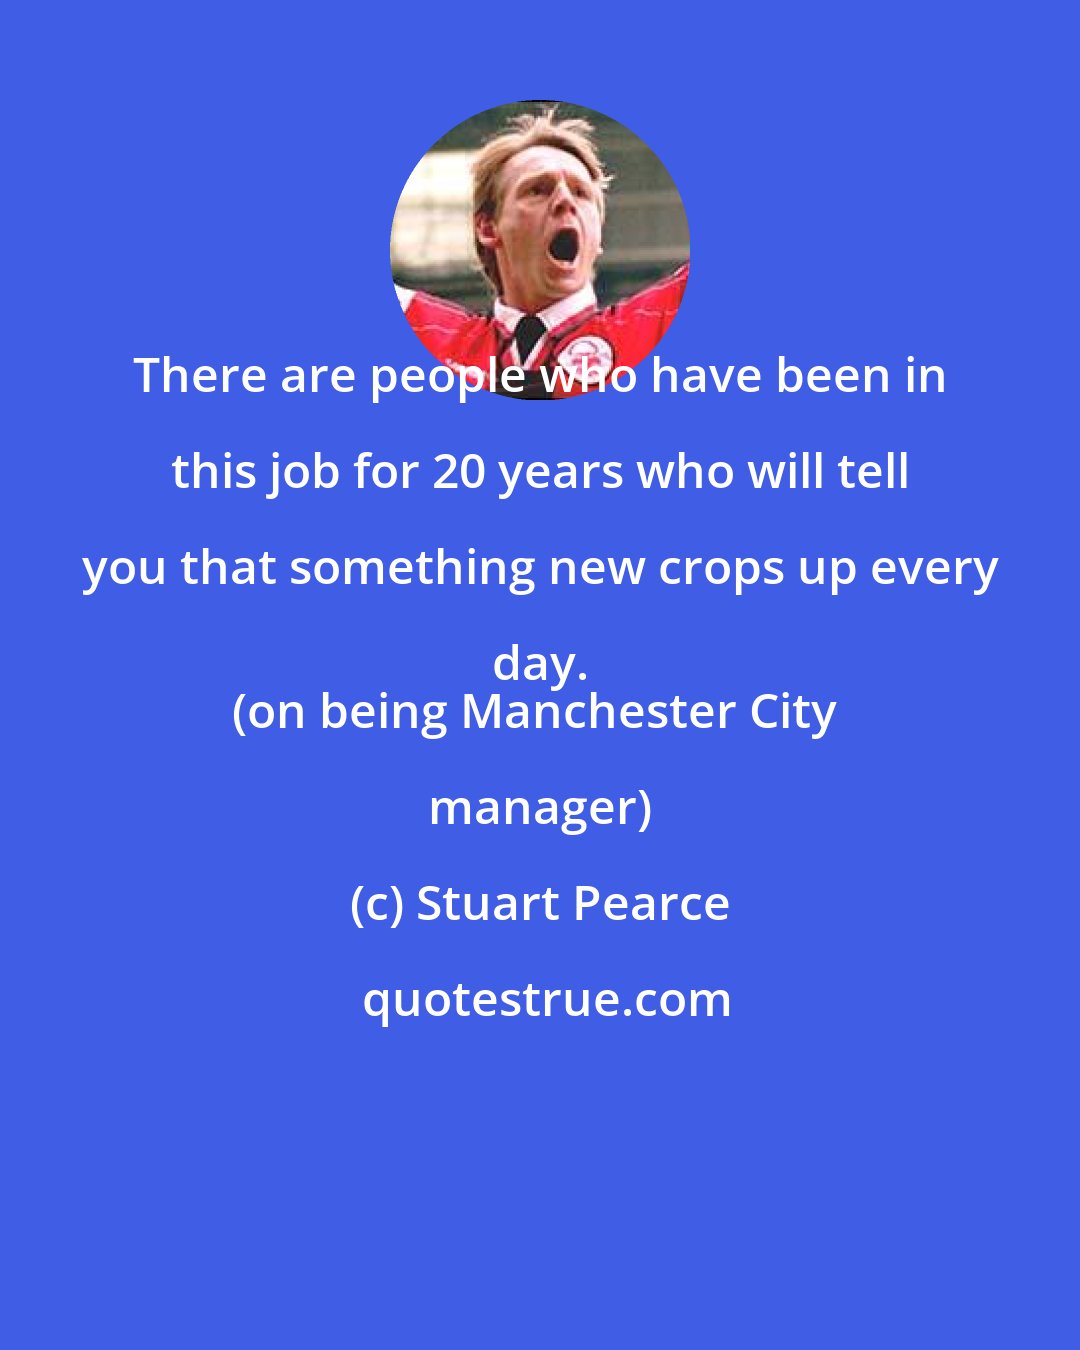 Stuart Pearce: There are people who have been in this job for 20 years who will tell you that something new crops up every day. 
(on being Manchester City manager)